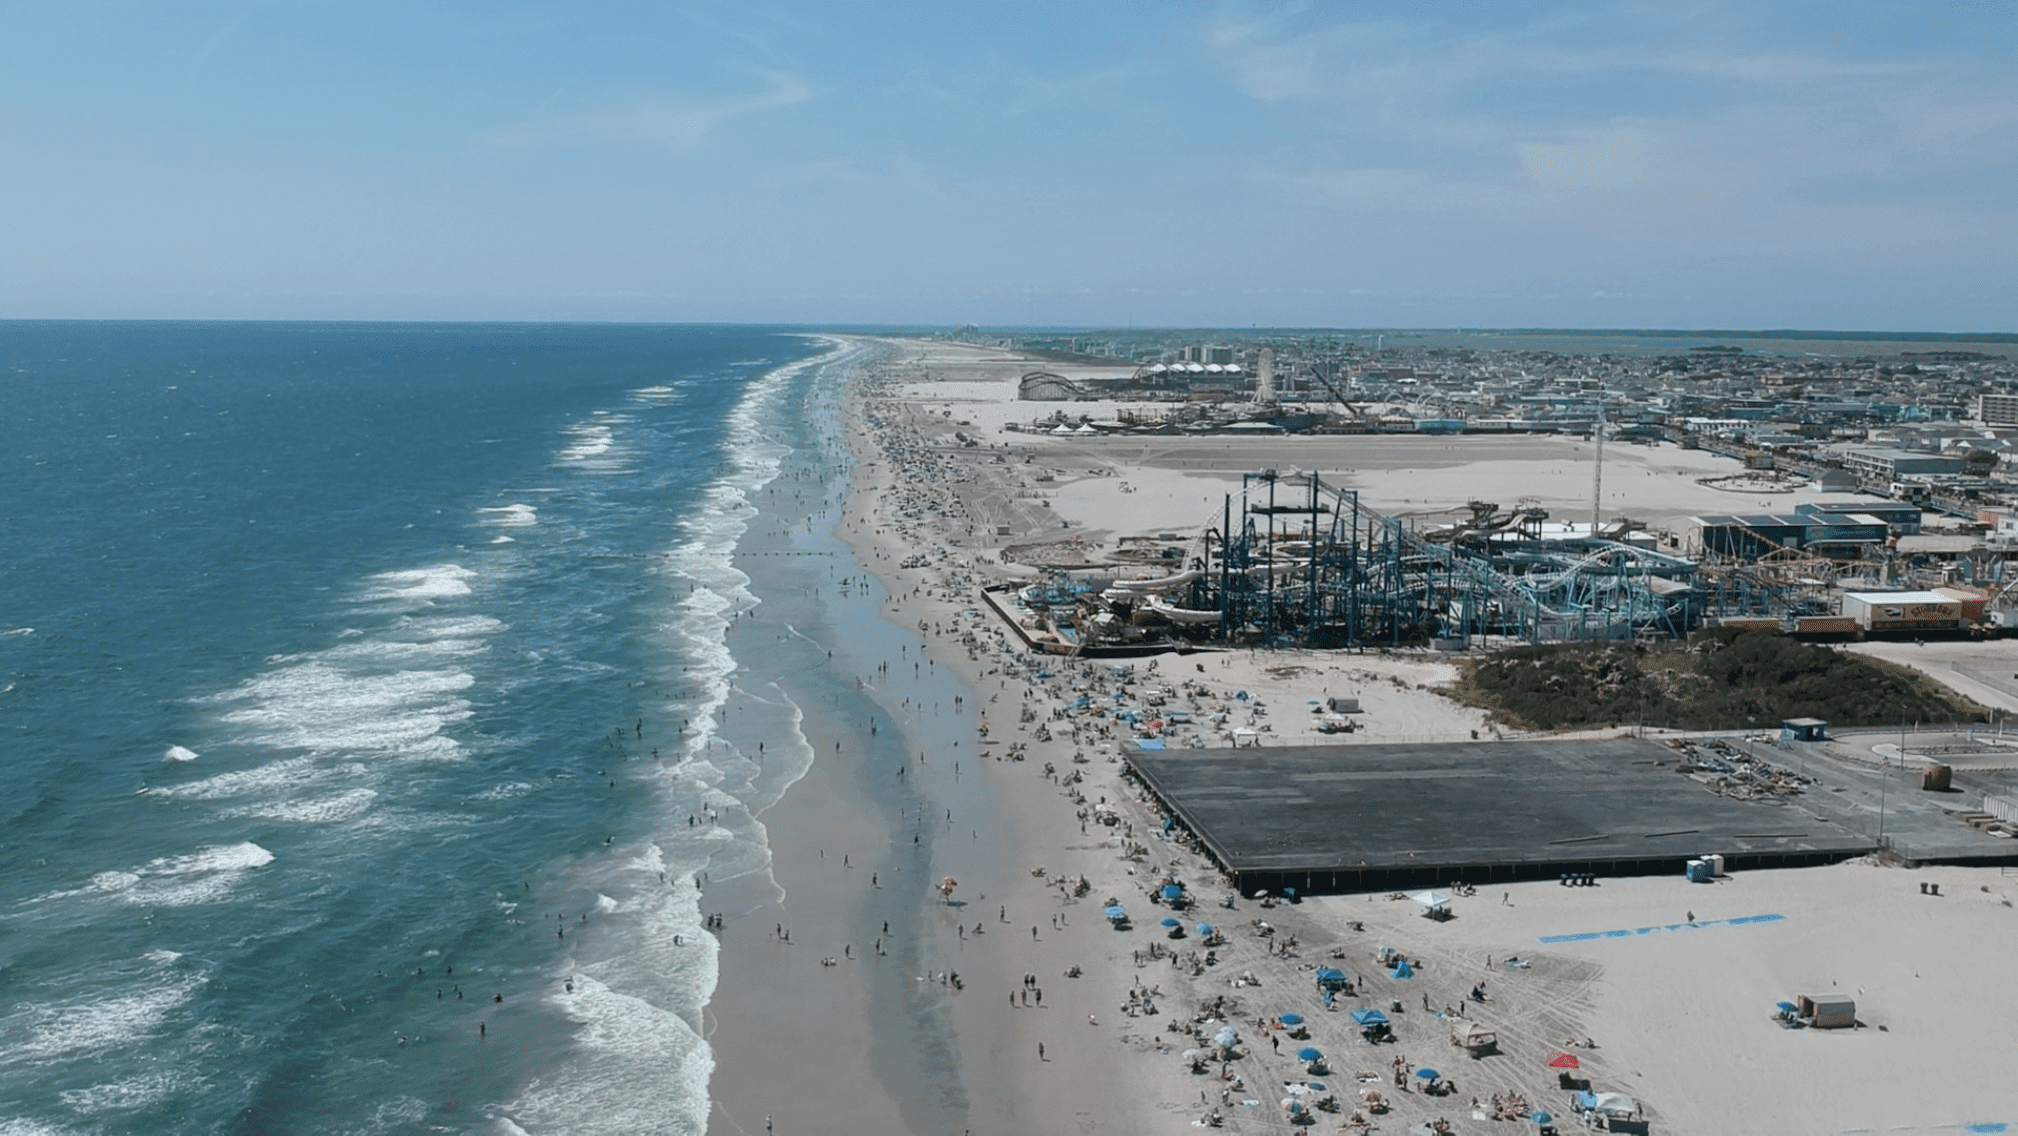 10 Best Things About Wildwood, New Jersey: America's Iconic Shore Destination